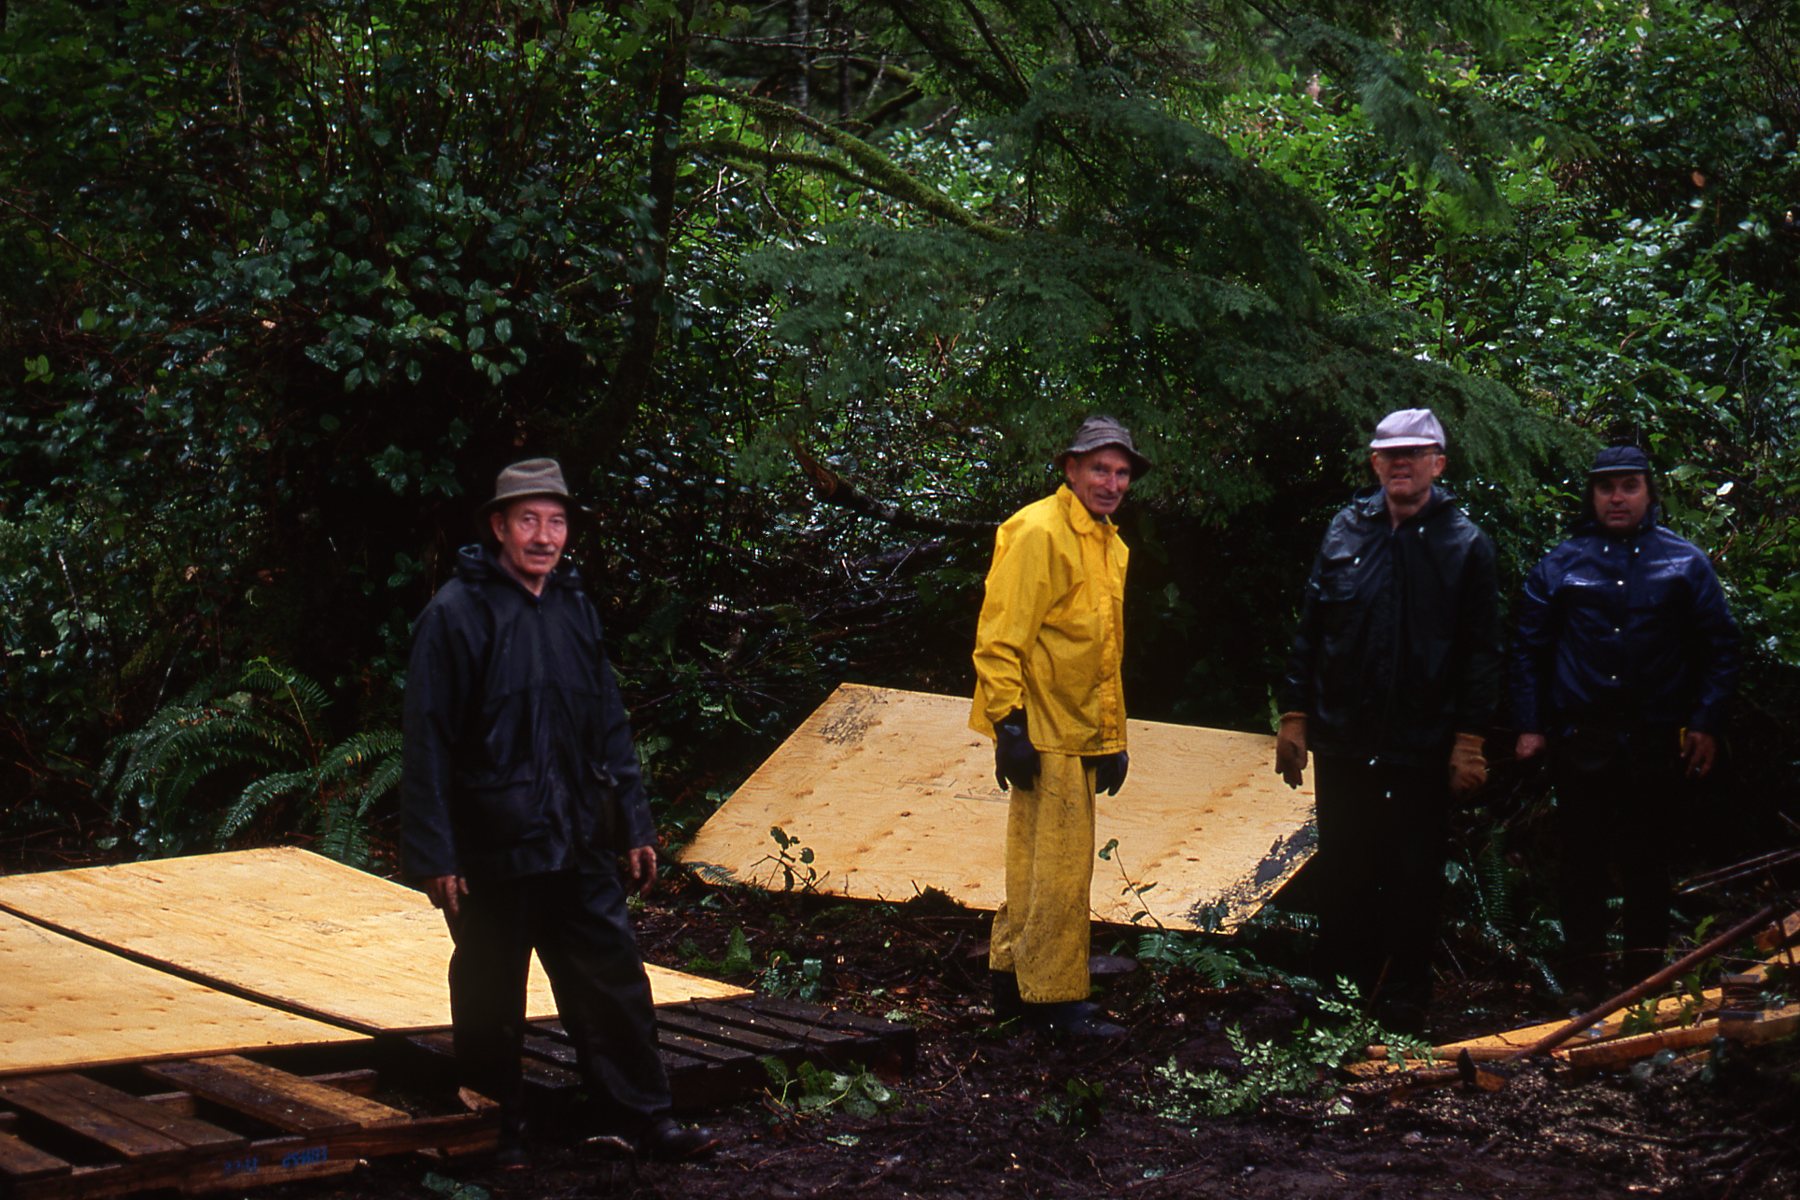 Don with two other trailbuilders on the Wildside trail in 1996